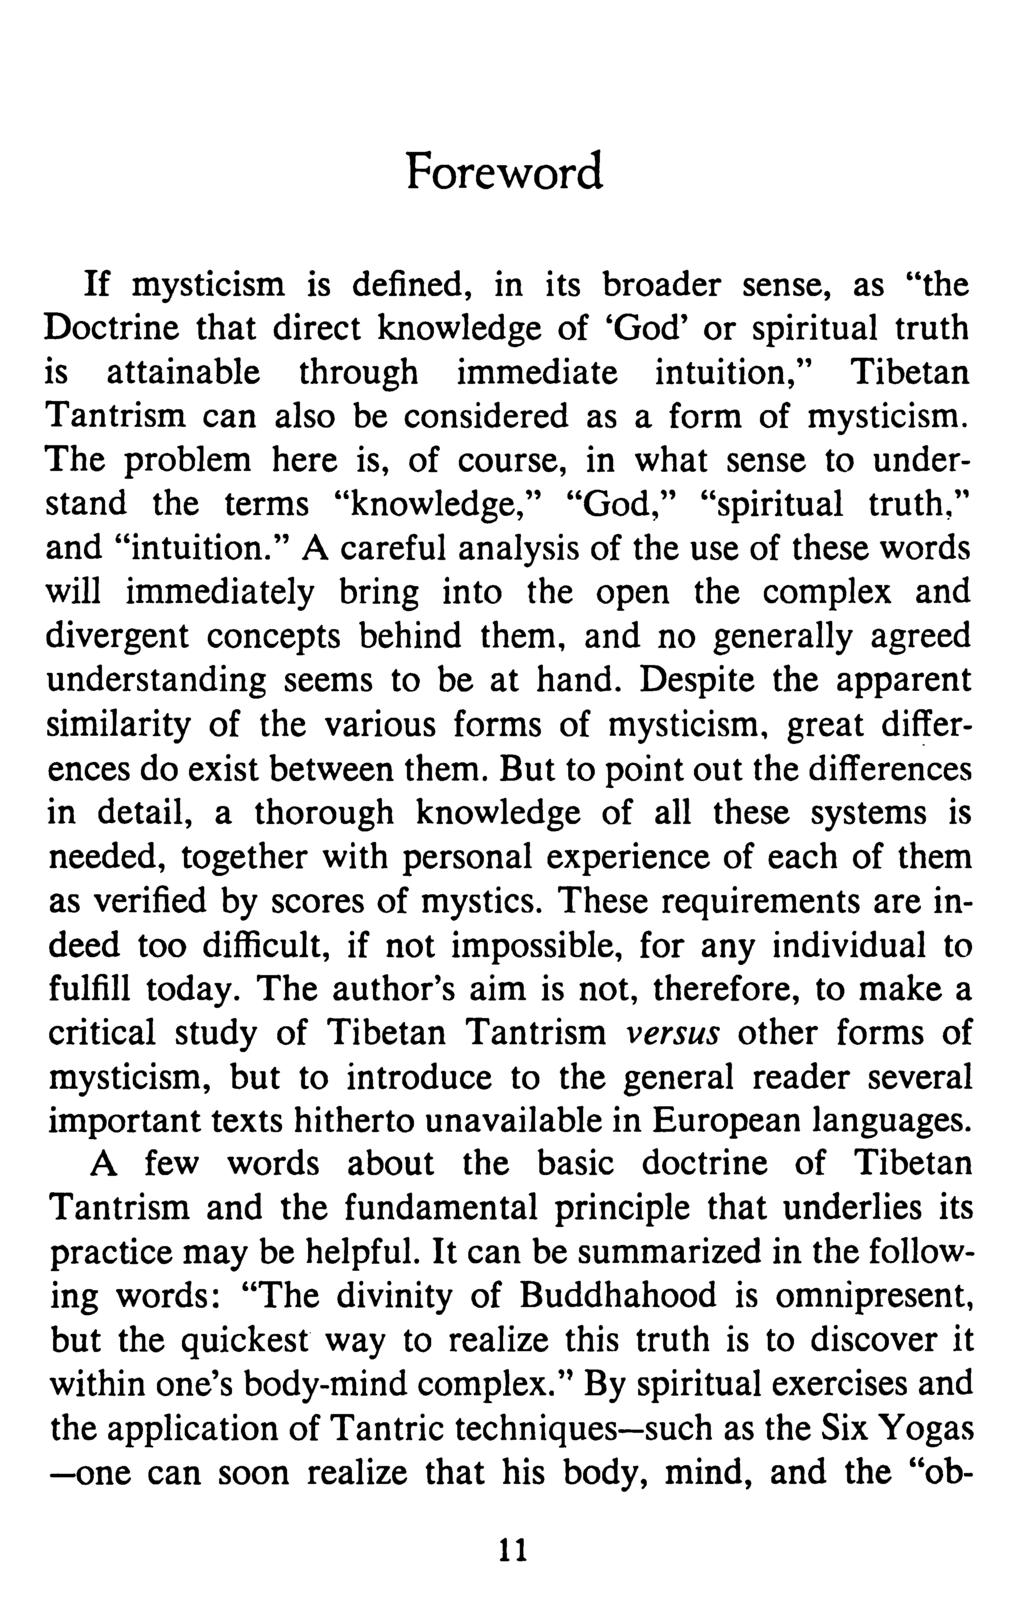 Foreword If mysticism is defined, in its broader sense, as "the Doctrine that direct knowledge of 'God' or spiritual truth is attainable through immediate intuition," Tibetan Tantrism can also be